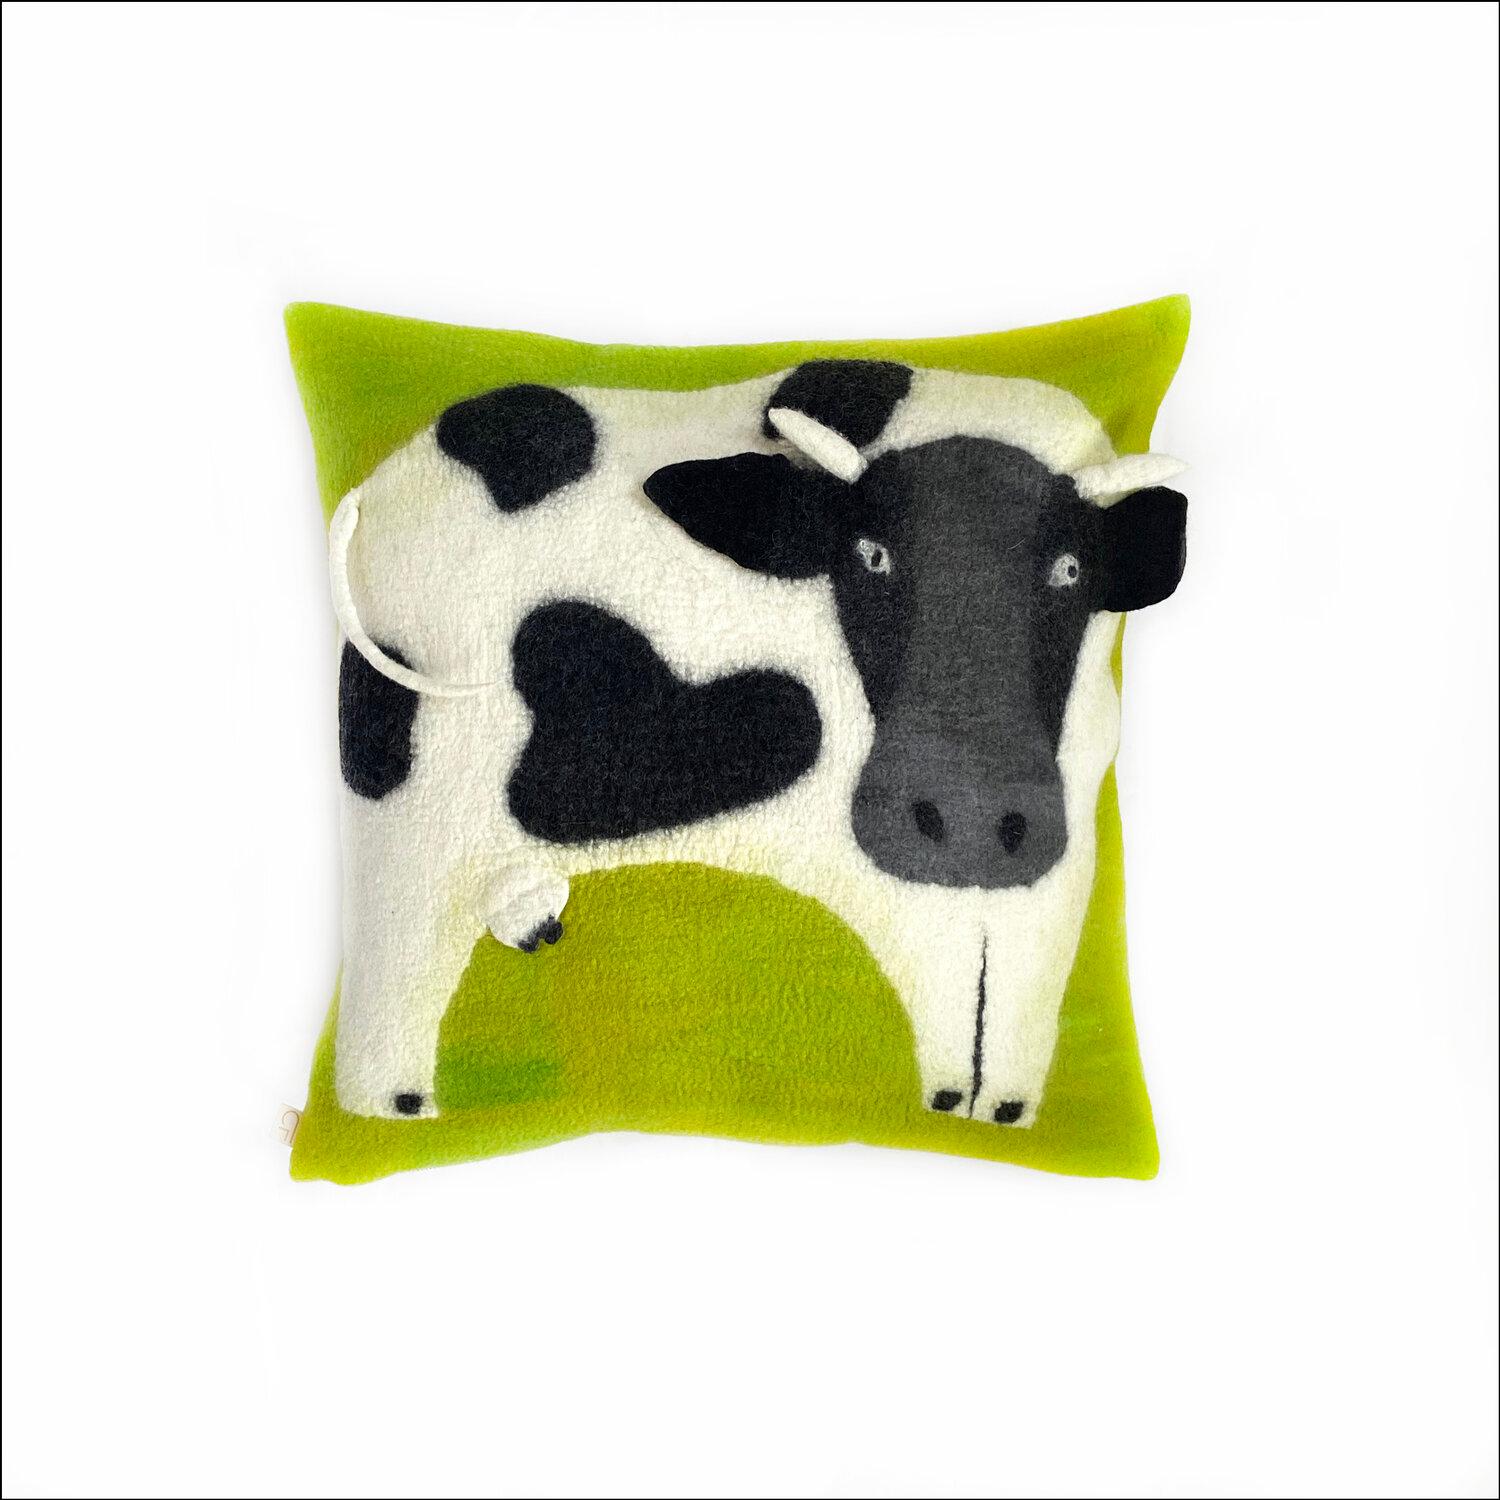 South African Contemporary Handmade Wool Pillow w/ Bumblebee Image handmade in South Africa